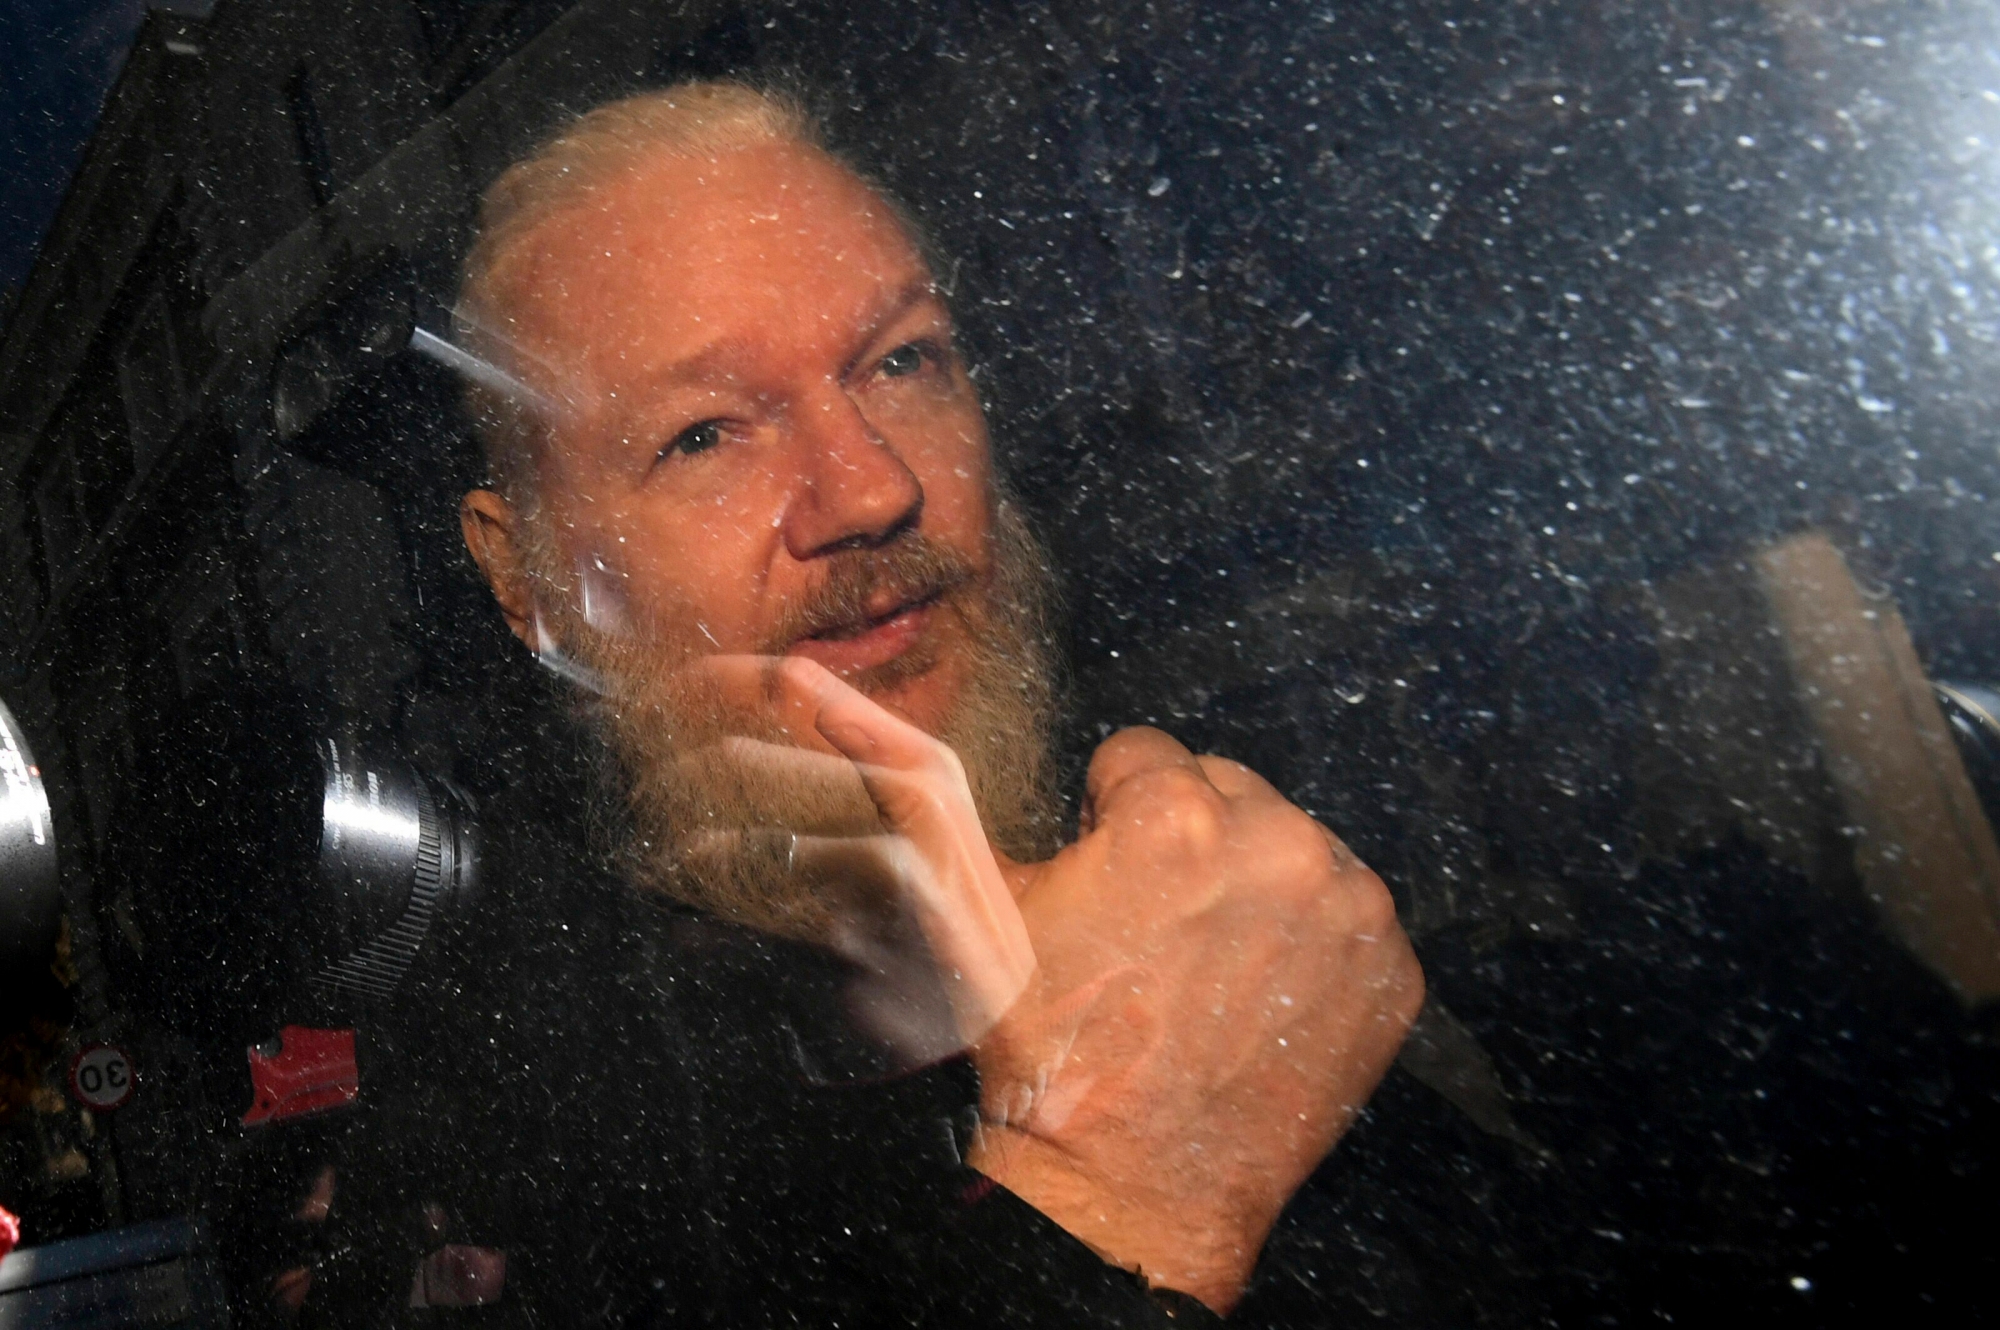 Julian Assange gestures as he arrives at Westminster Magistrates' Court in London, after the WikiLeaks founder was arrested by officers from the Metropolitan Police and taken into custody Thursday April 11, 2019. Police in London arrested WikiLeaks founder Assange at the Ecuadorean embassy Thursday, April 11, 2019 for failing to surrender to the court in 2012, shortly after the South American nation revoked his asylum .(Victoria Jones/PA via AP) Britain Wikileaks Assange Arrested